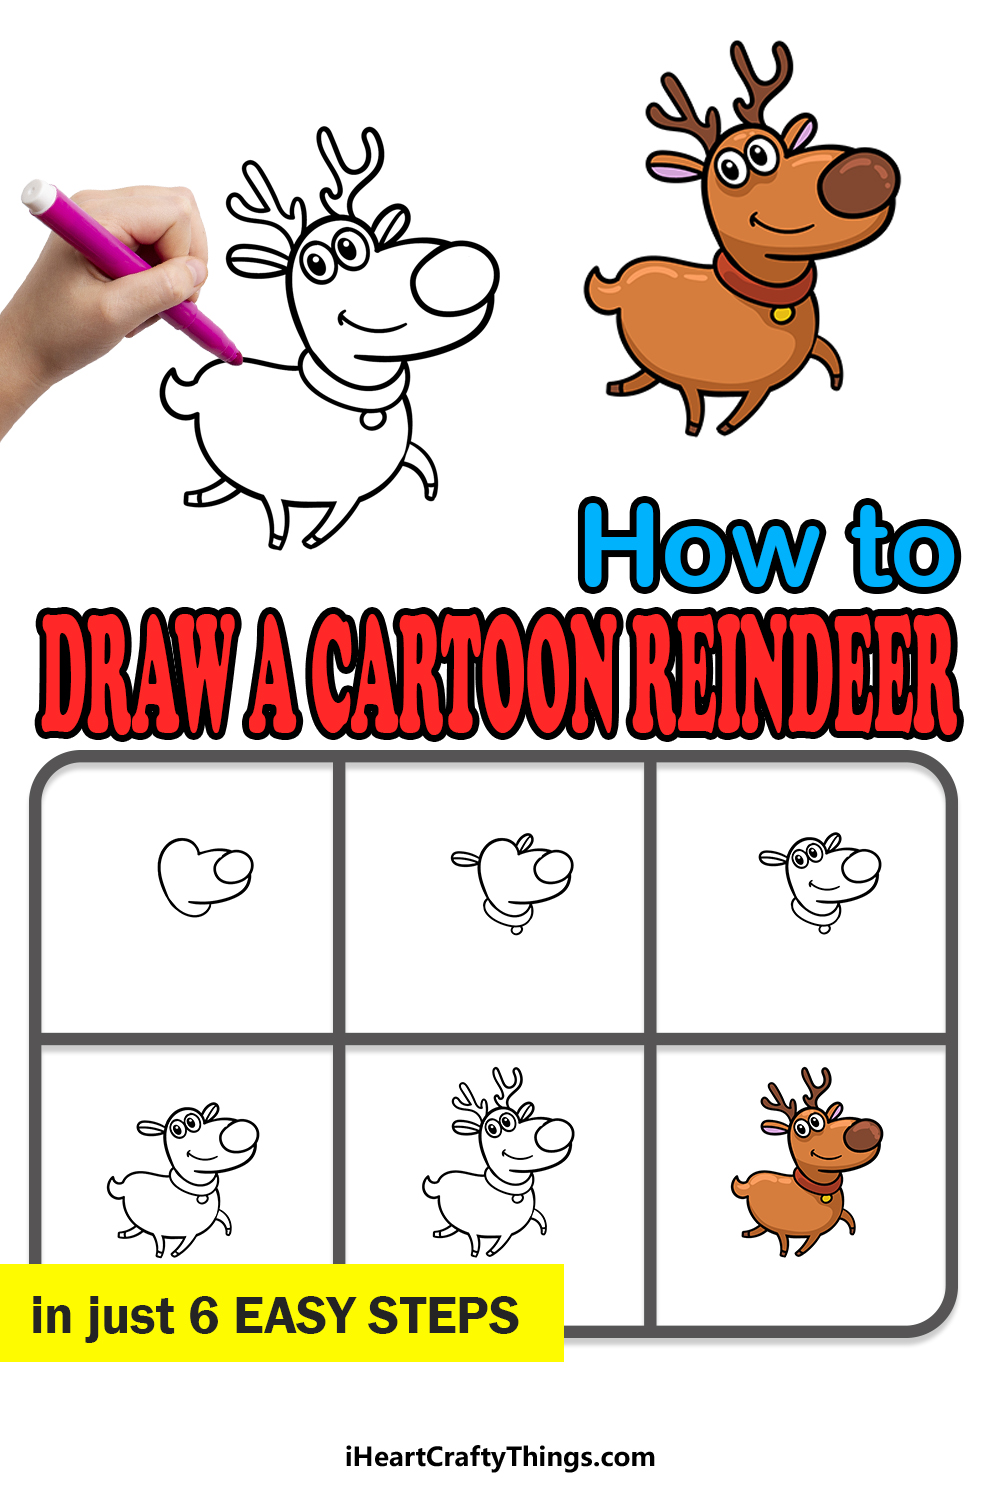 how to draw a cartoon reindeer in 6 easy steps